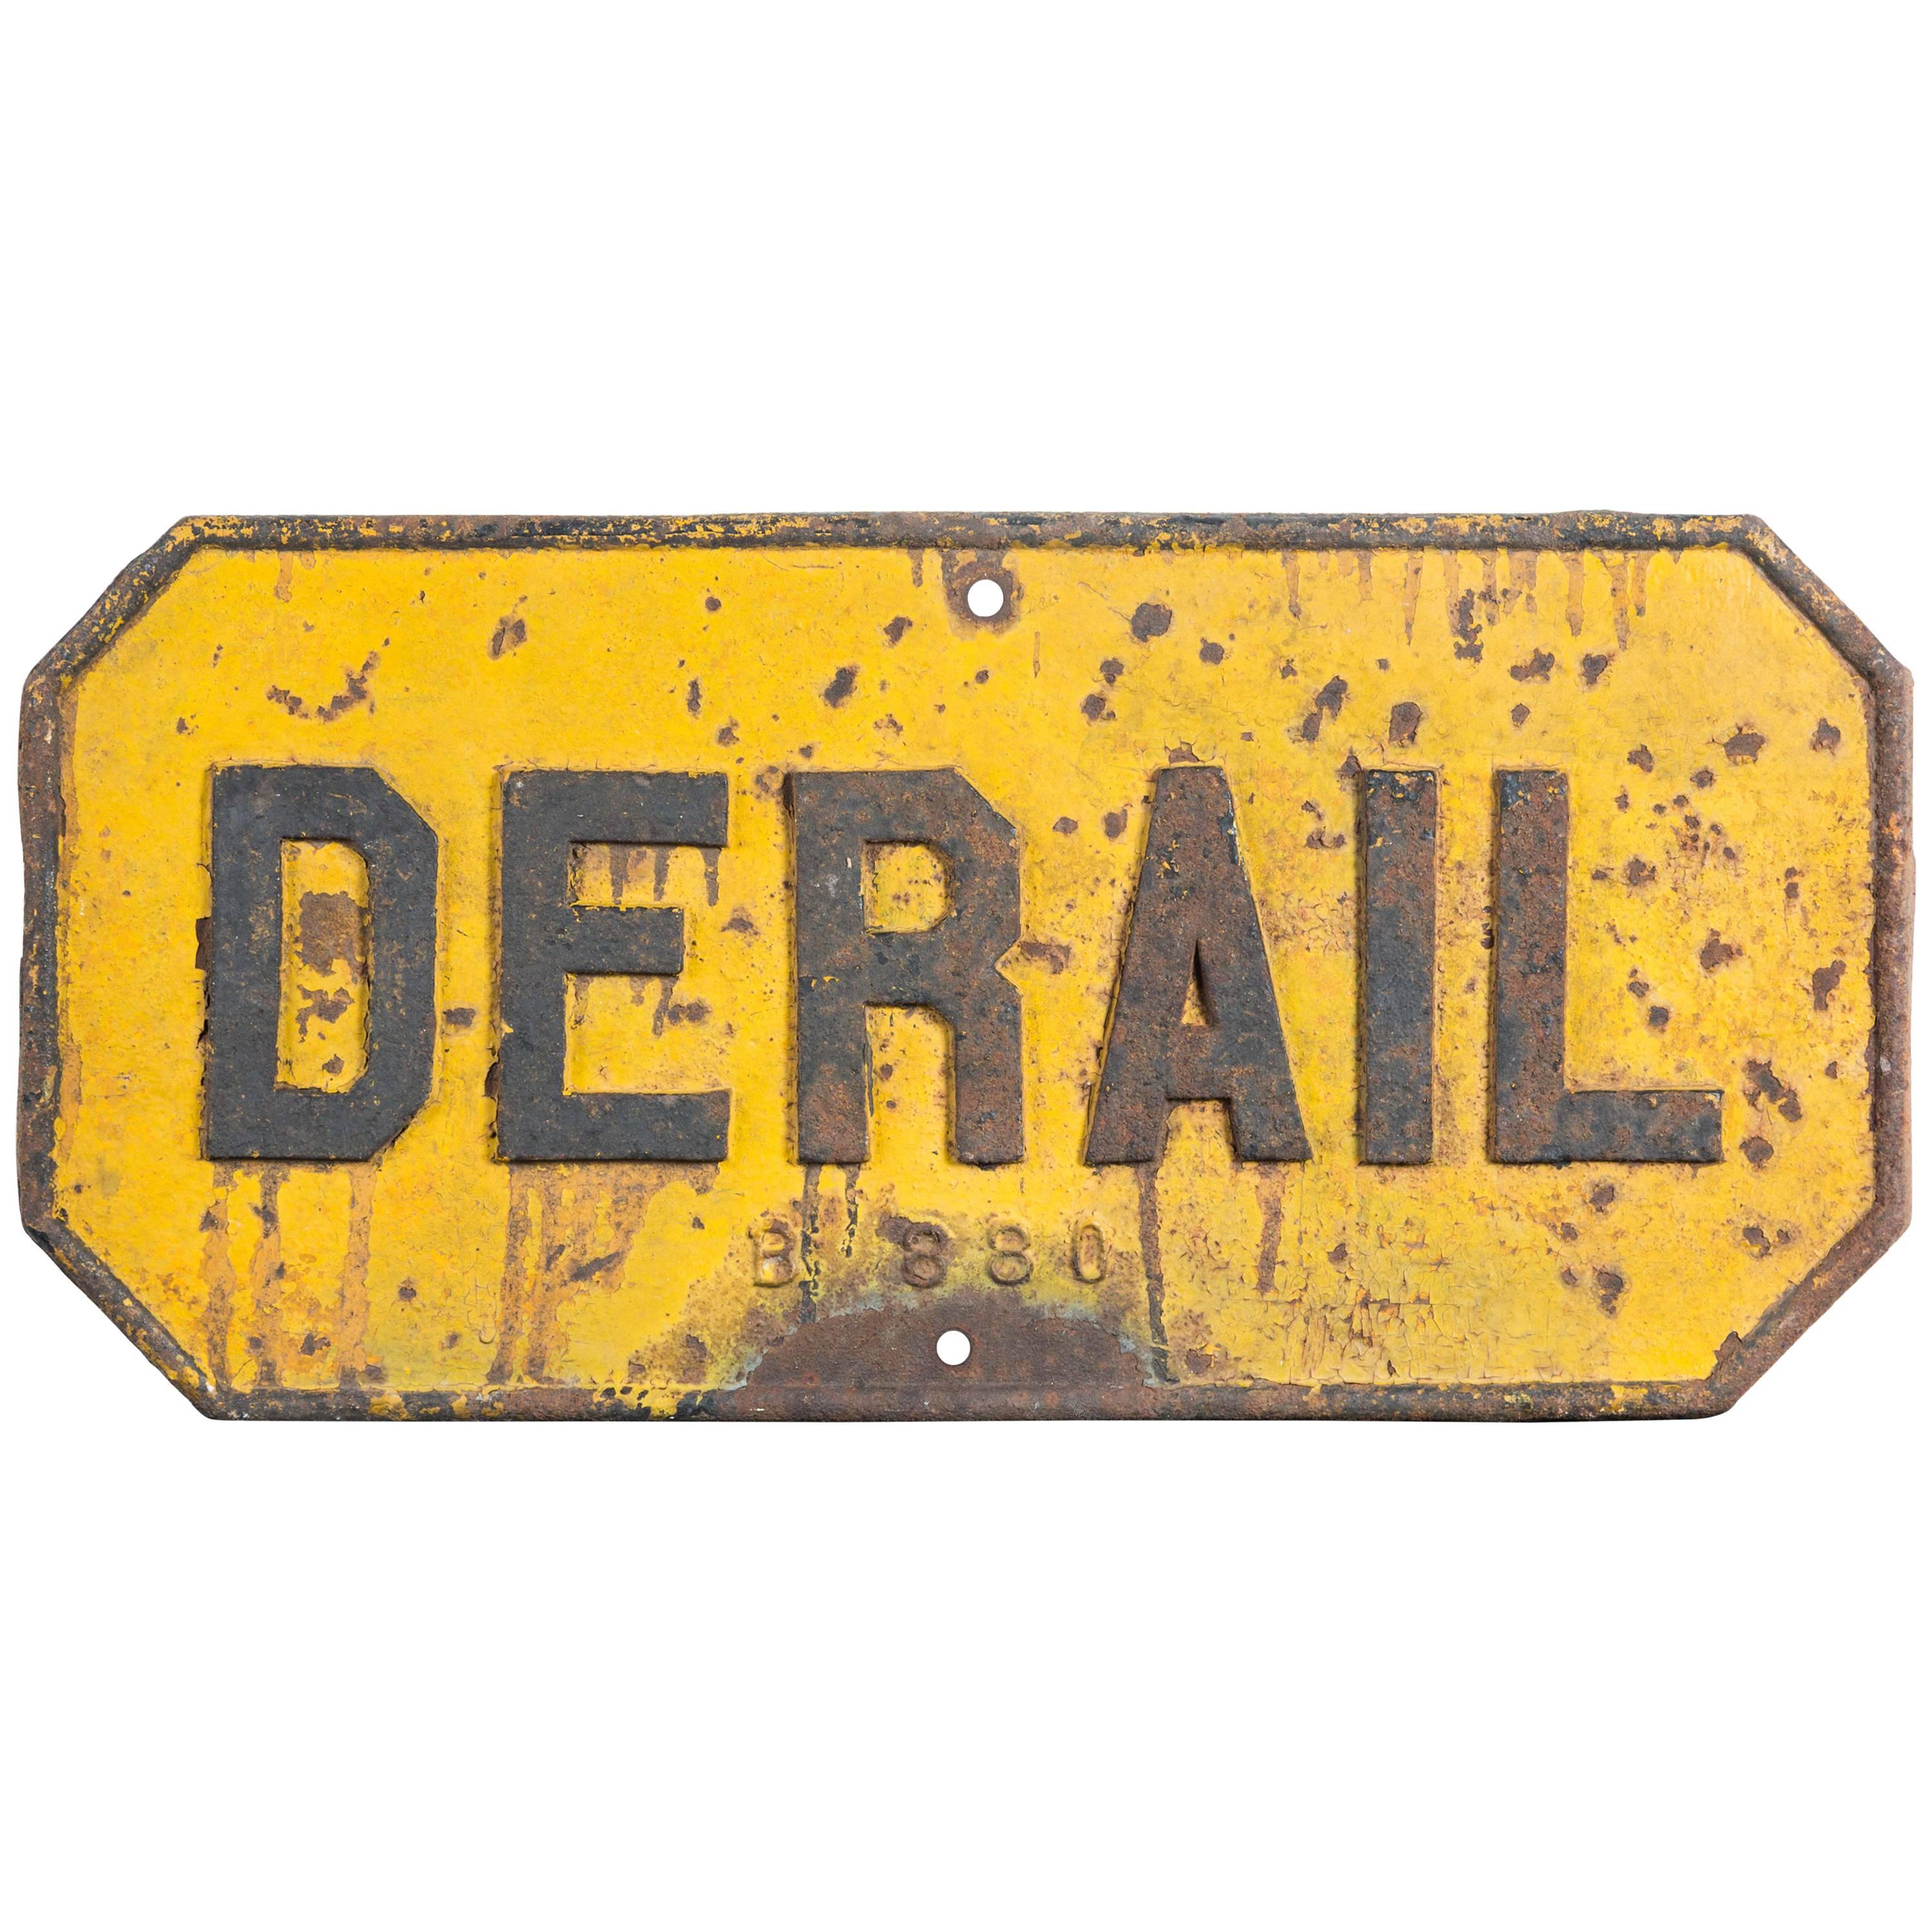 Cast Iron Railroad DERAIL Sign, Early 20th Century